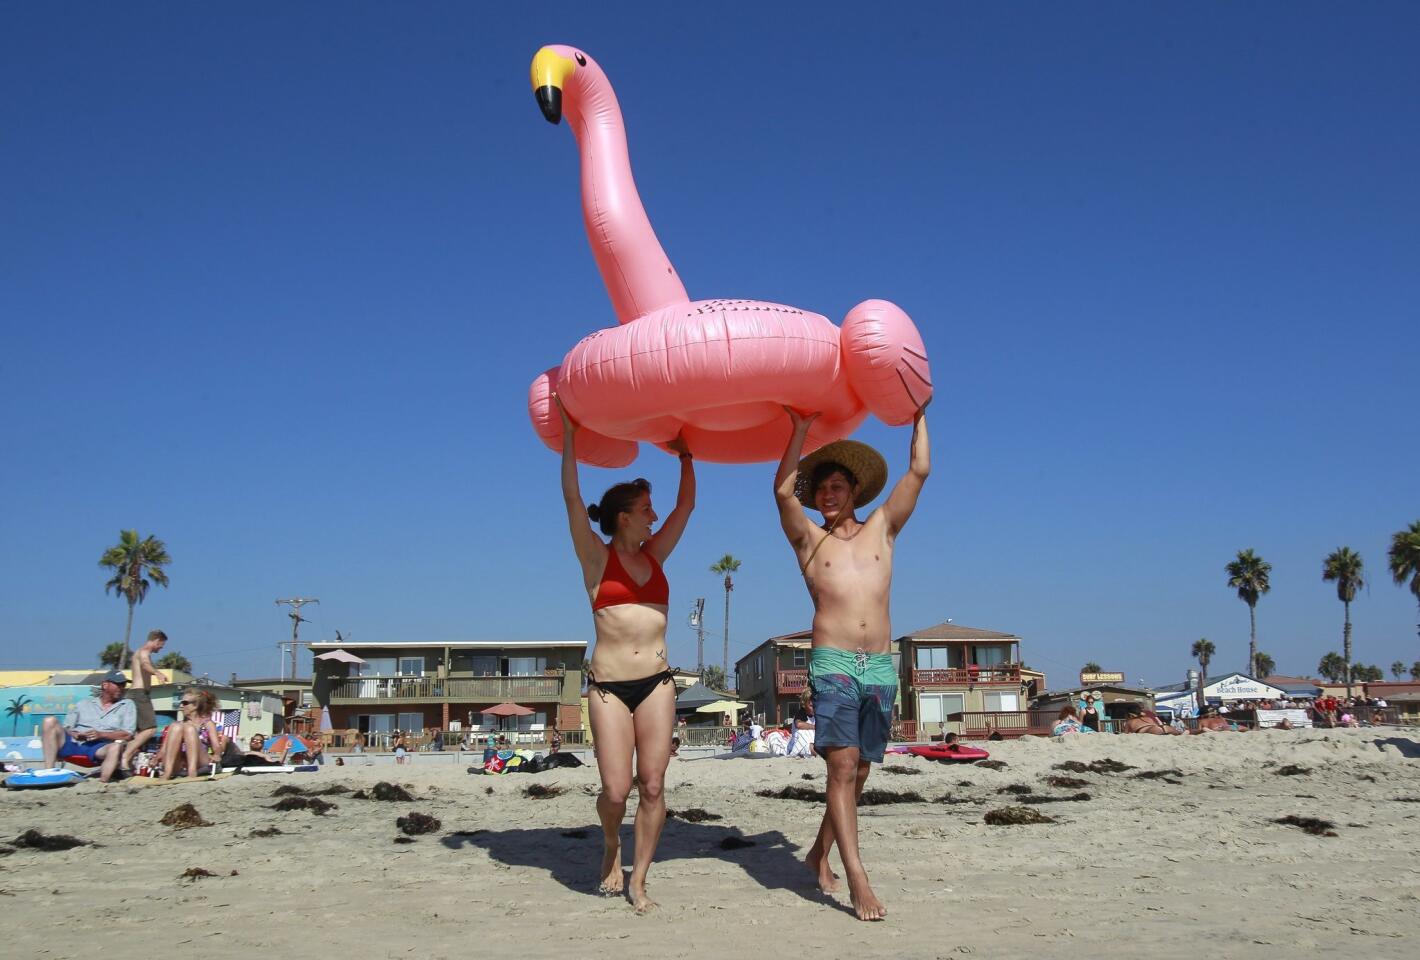 Ryan Field and Carly Topazio carry an inflatable pink flamingo toward the ocean to ride the surf on it at Pacific Beach.